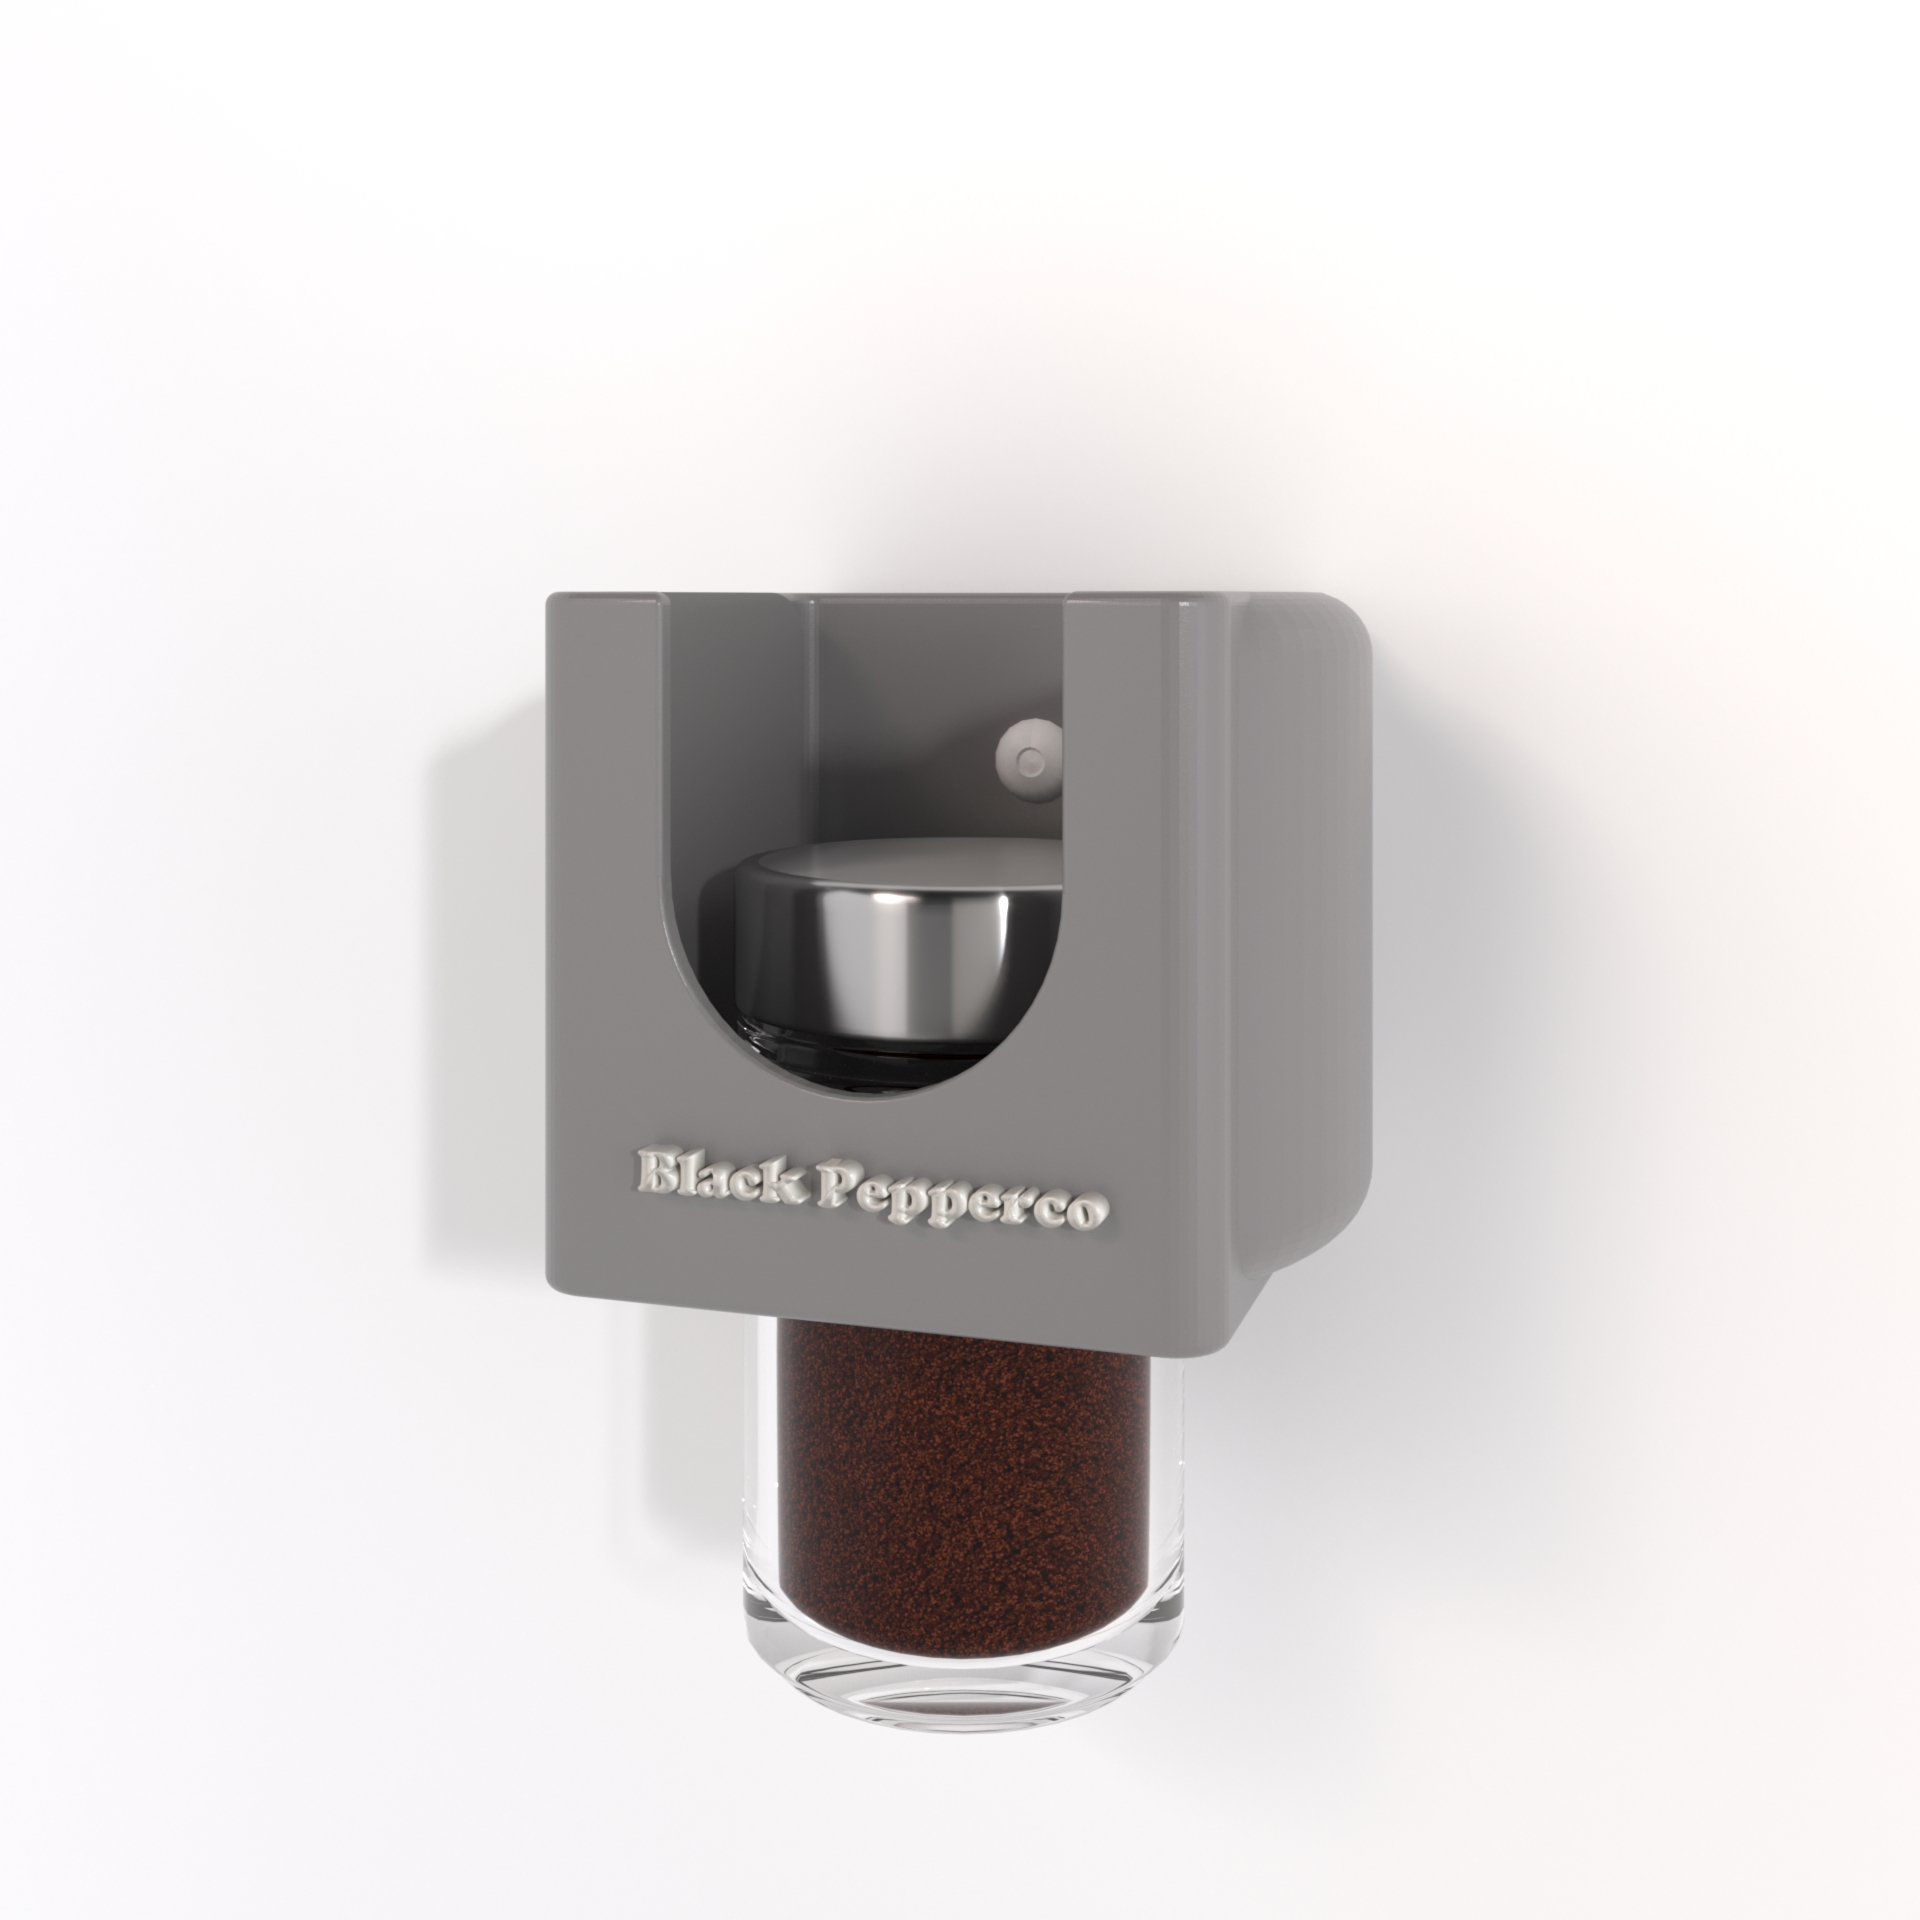 a-spice-holder-black-pepperco